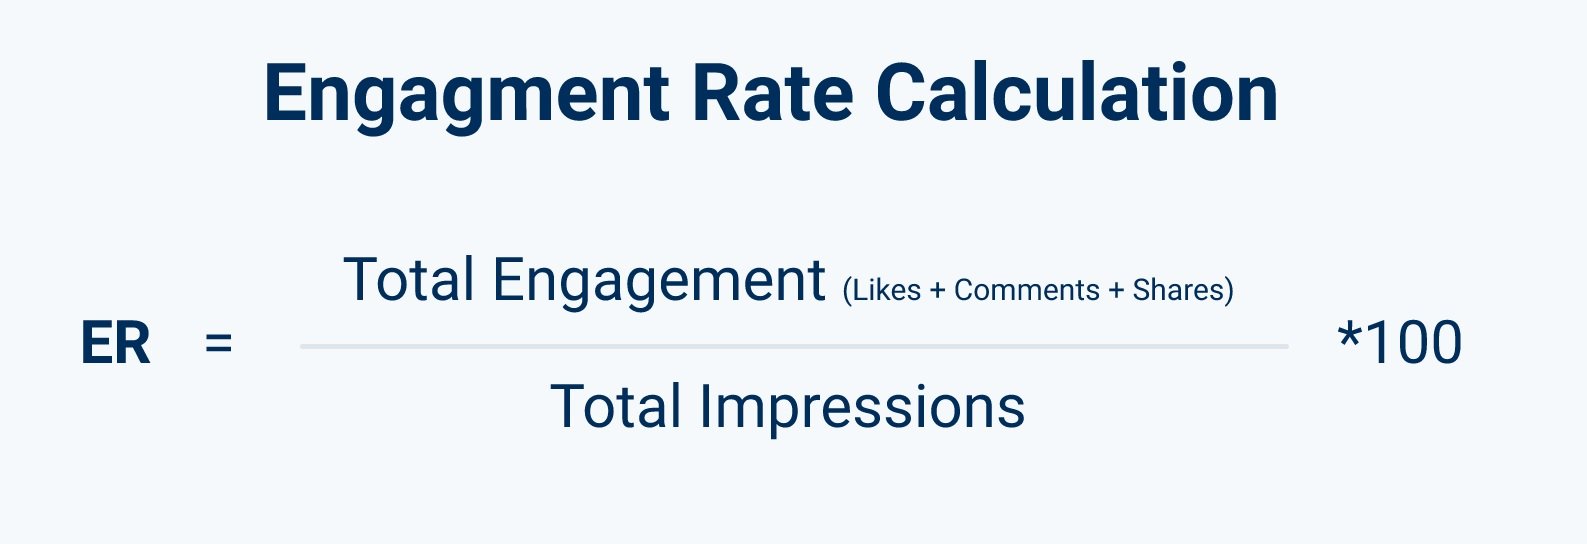 A visualization of an engagement rate calculation formula.